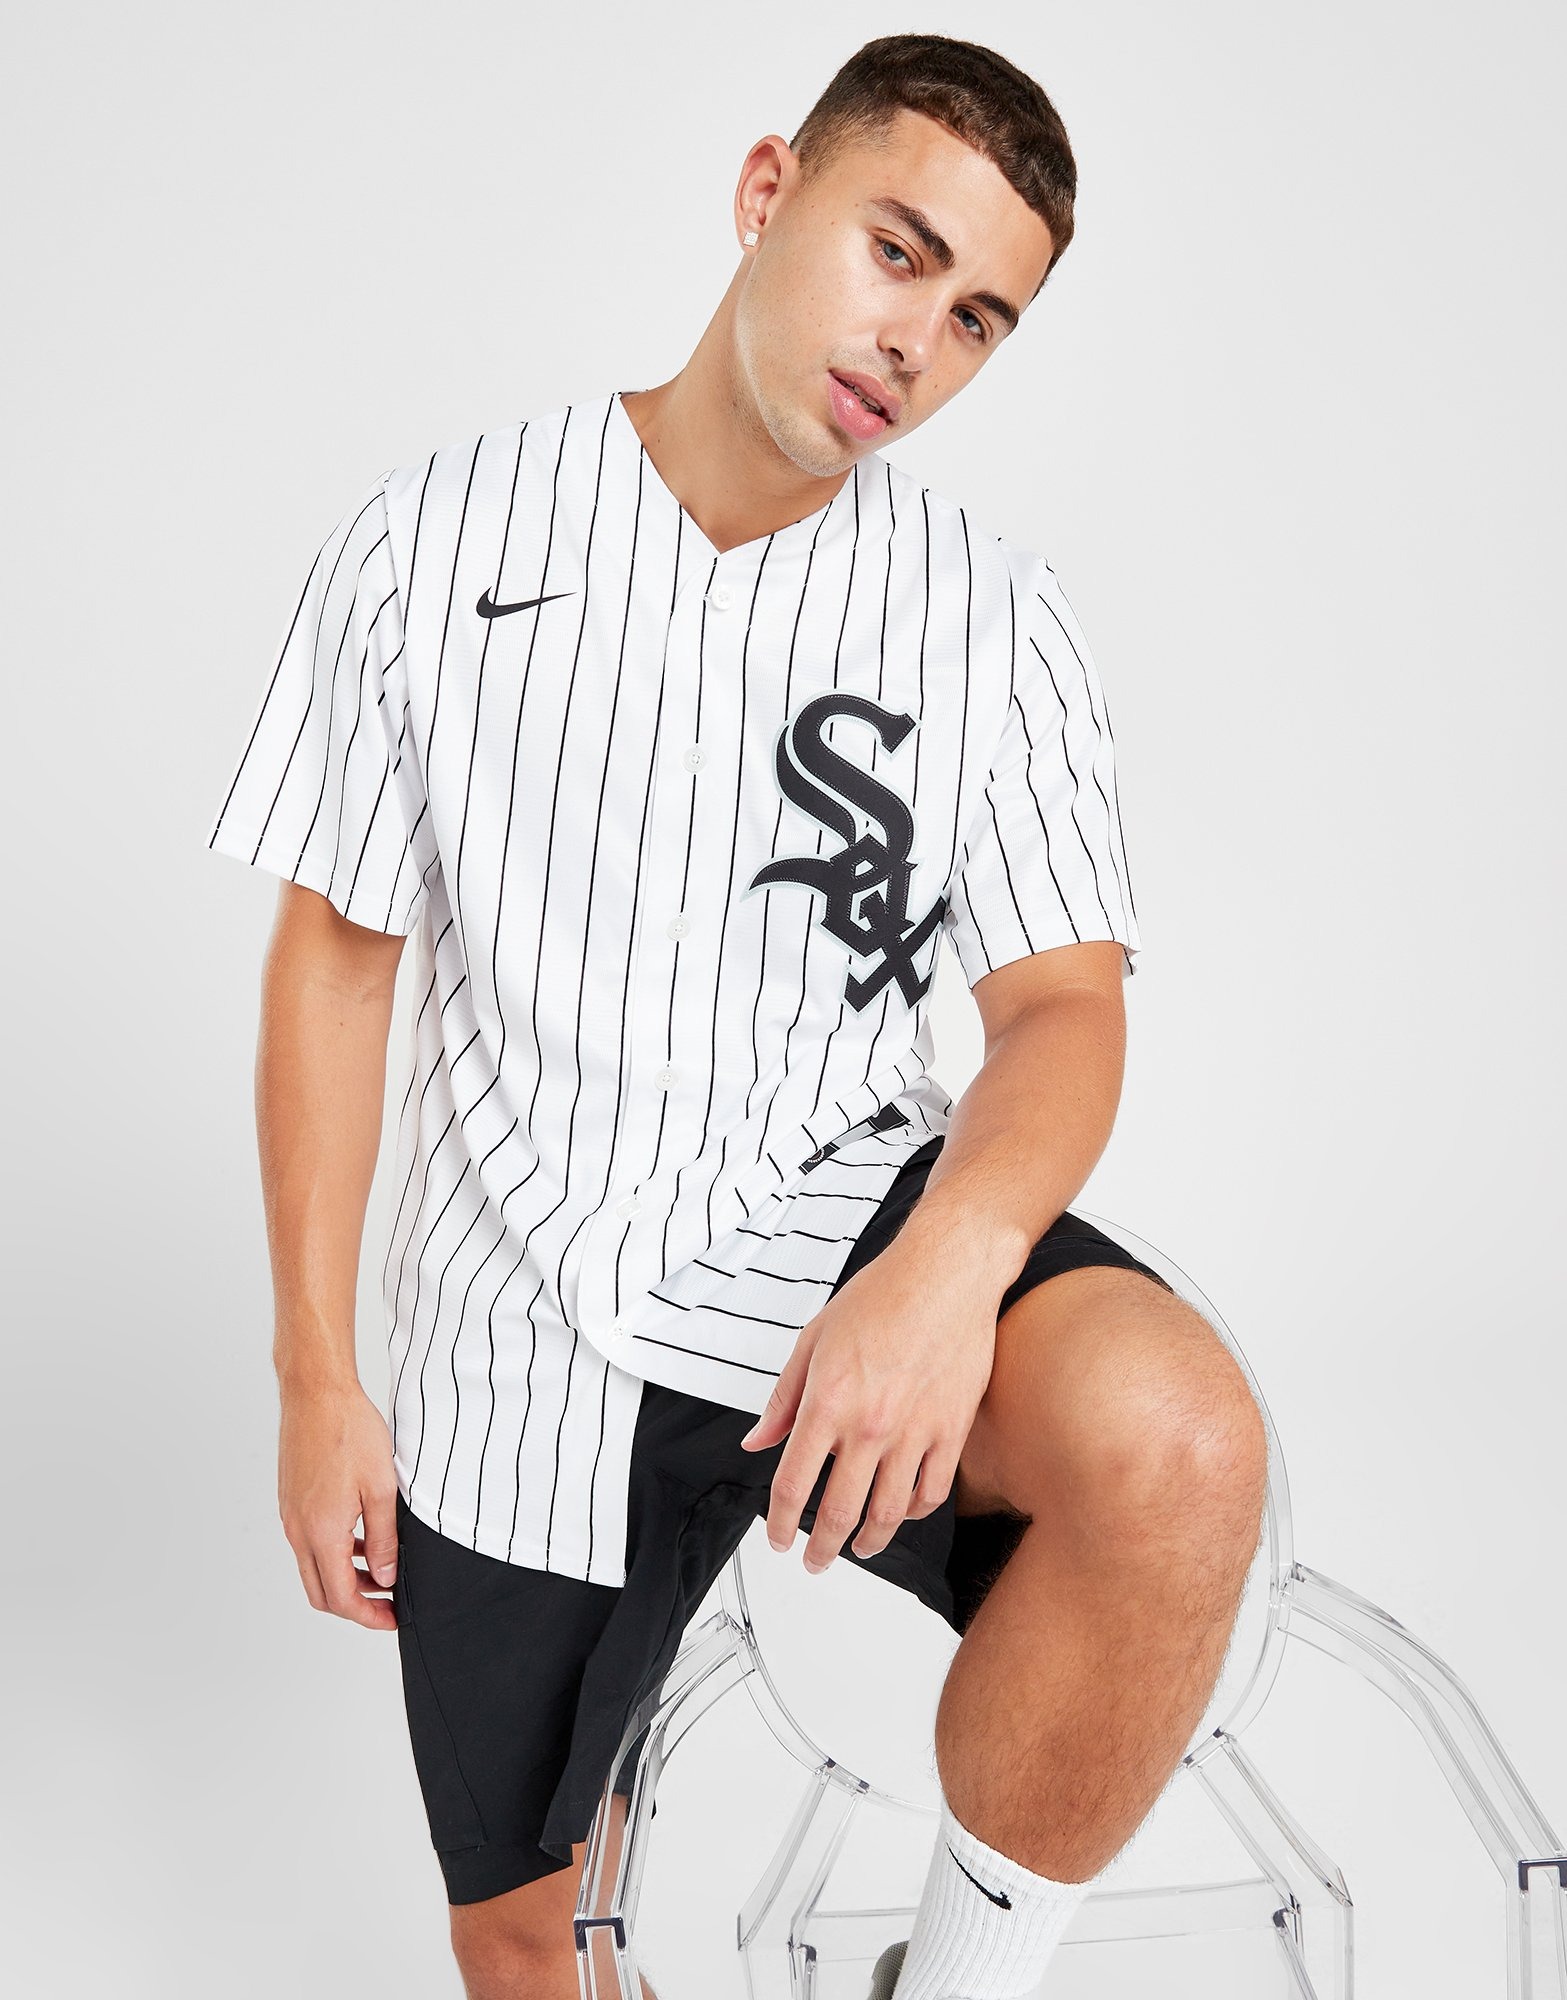  Majestic Chicago White Sox Youth Short Sleeve Performance Shirt  - White : Sports & Outdoors